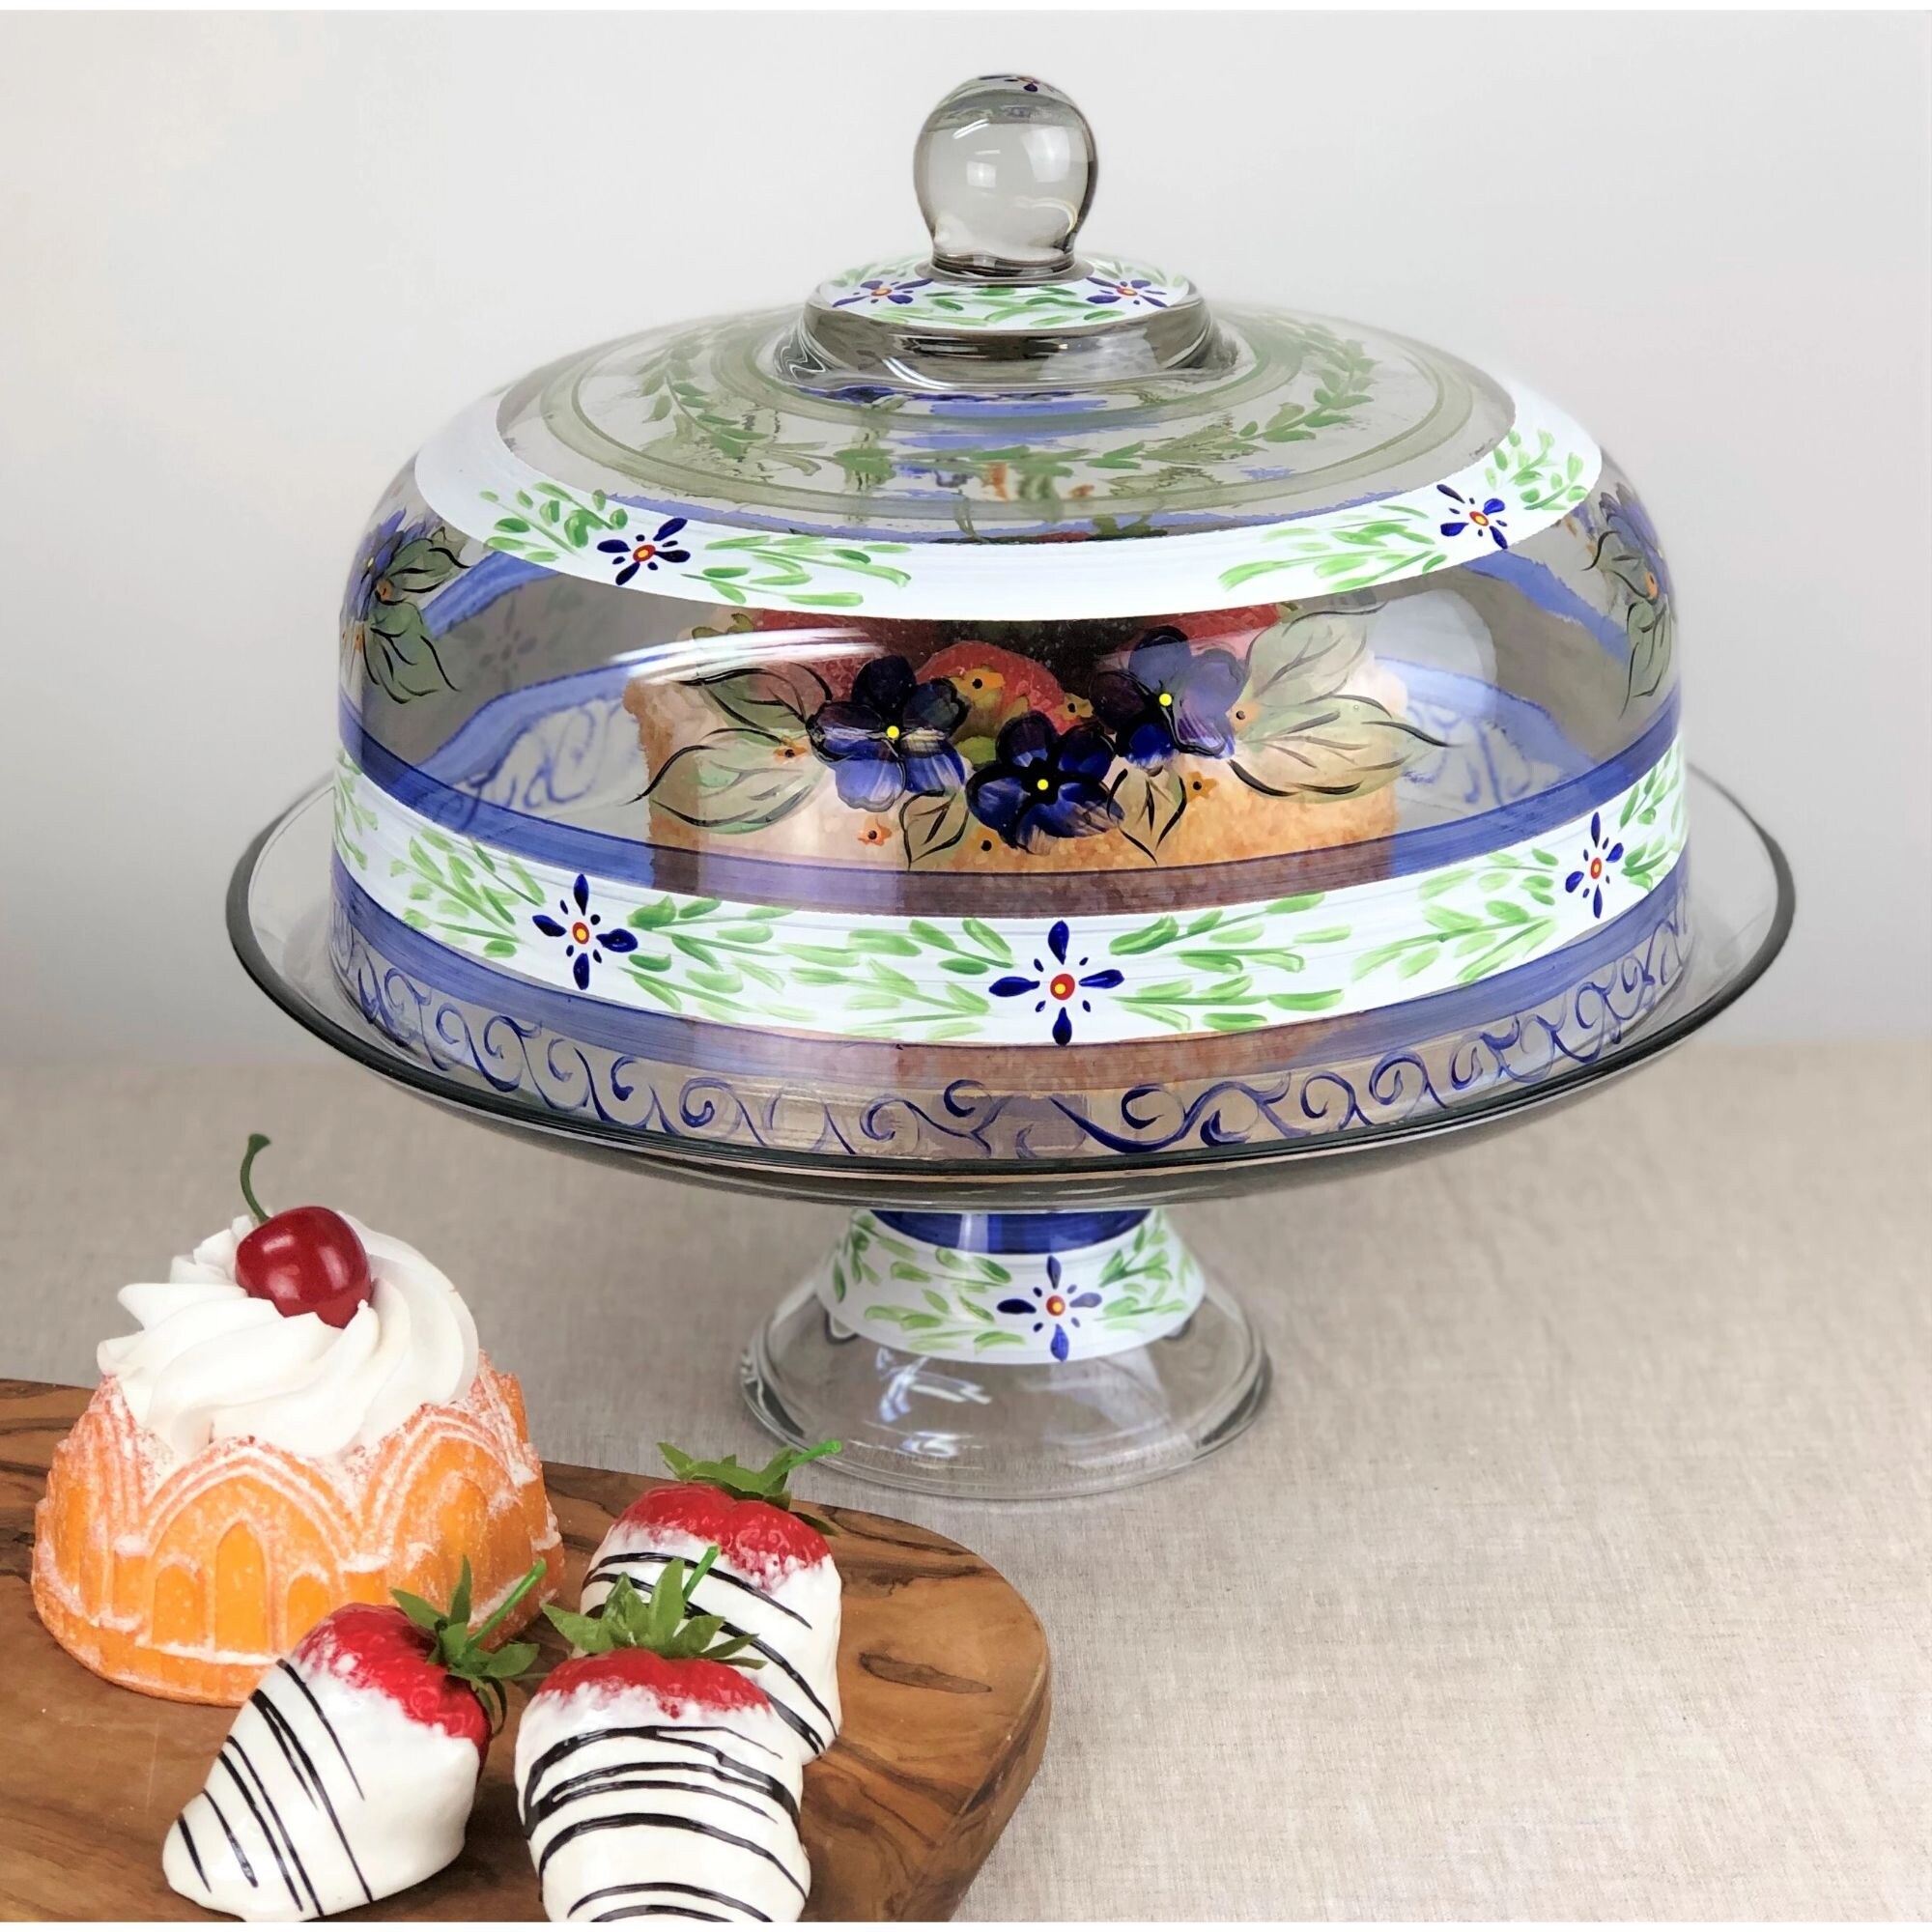 Orange Glass Cake Pie Plate & Round Dome Cover Stand Lid Display Convertible Set 